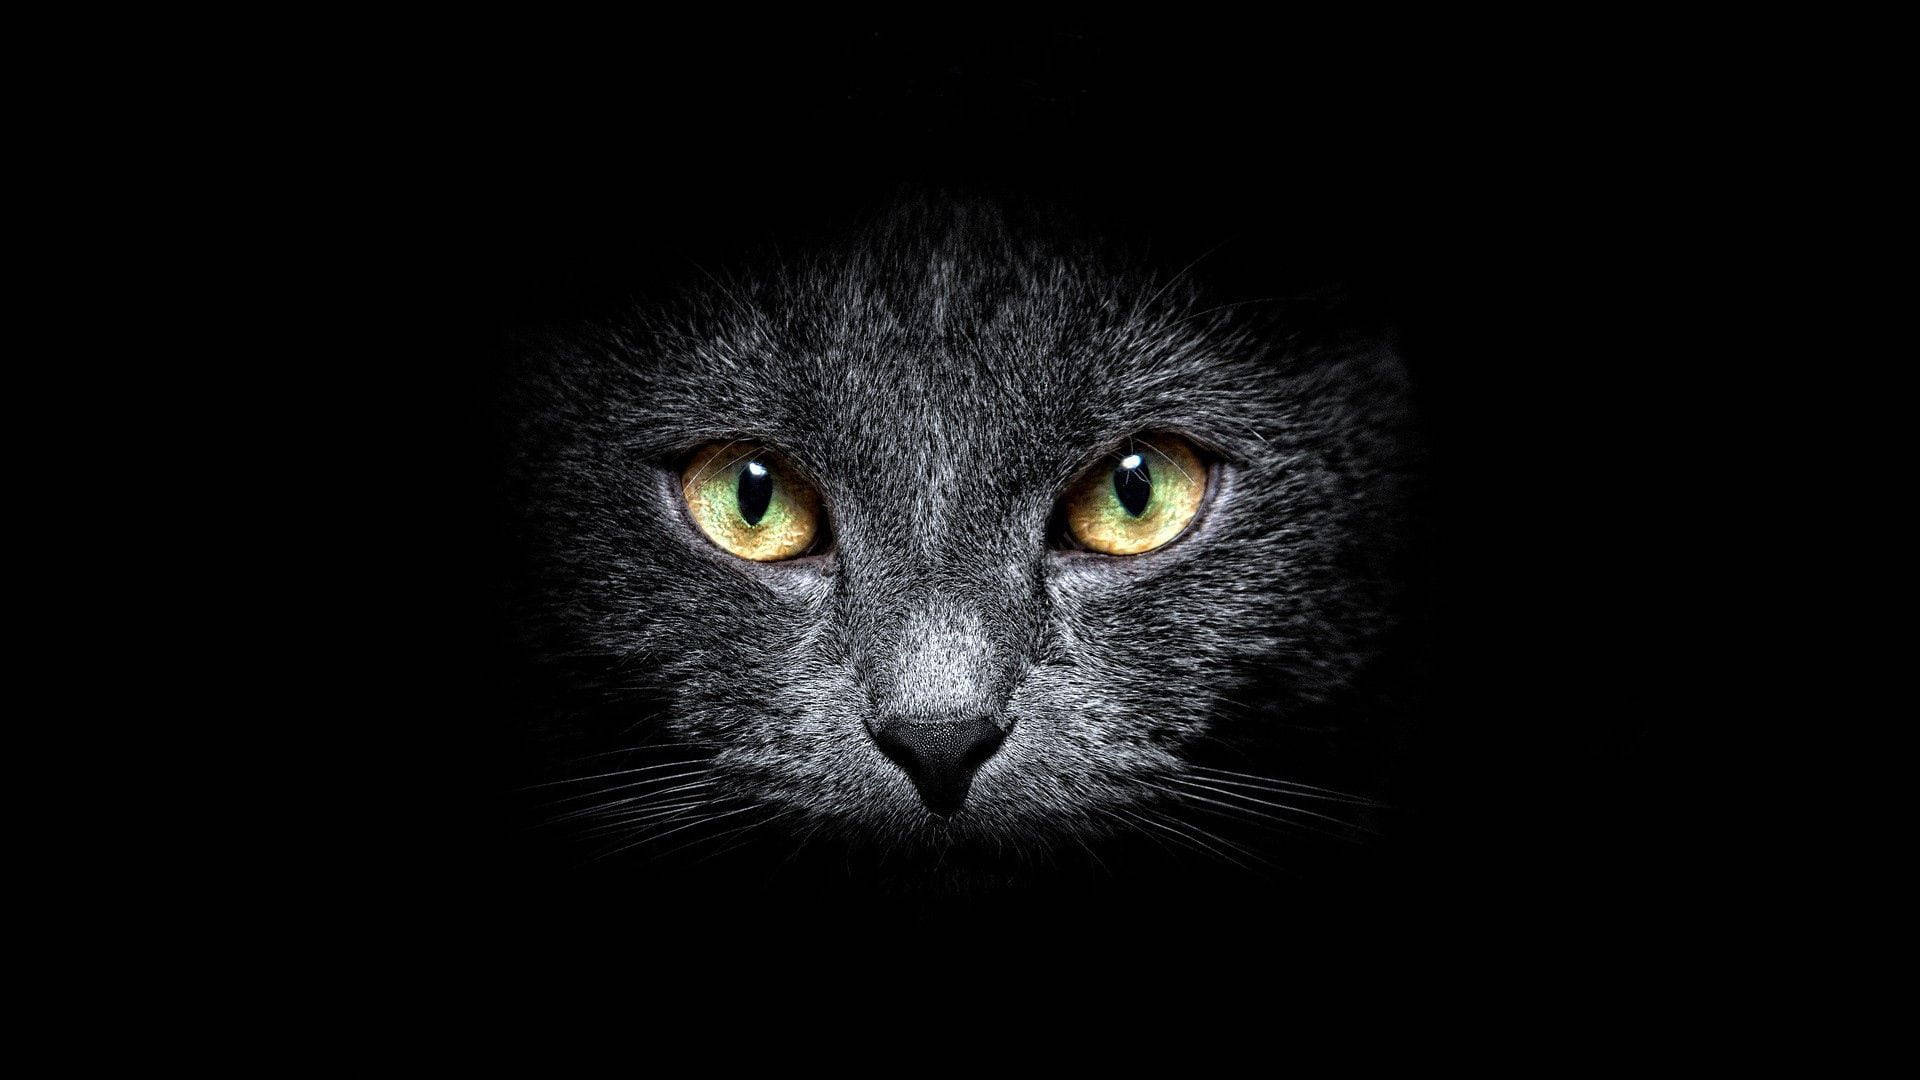 Background Black With Cat Eyes Wallpaper